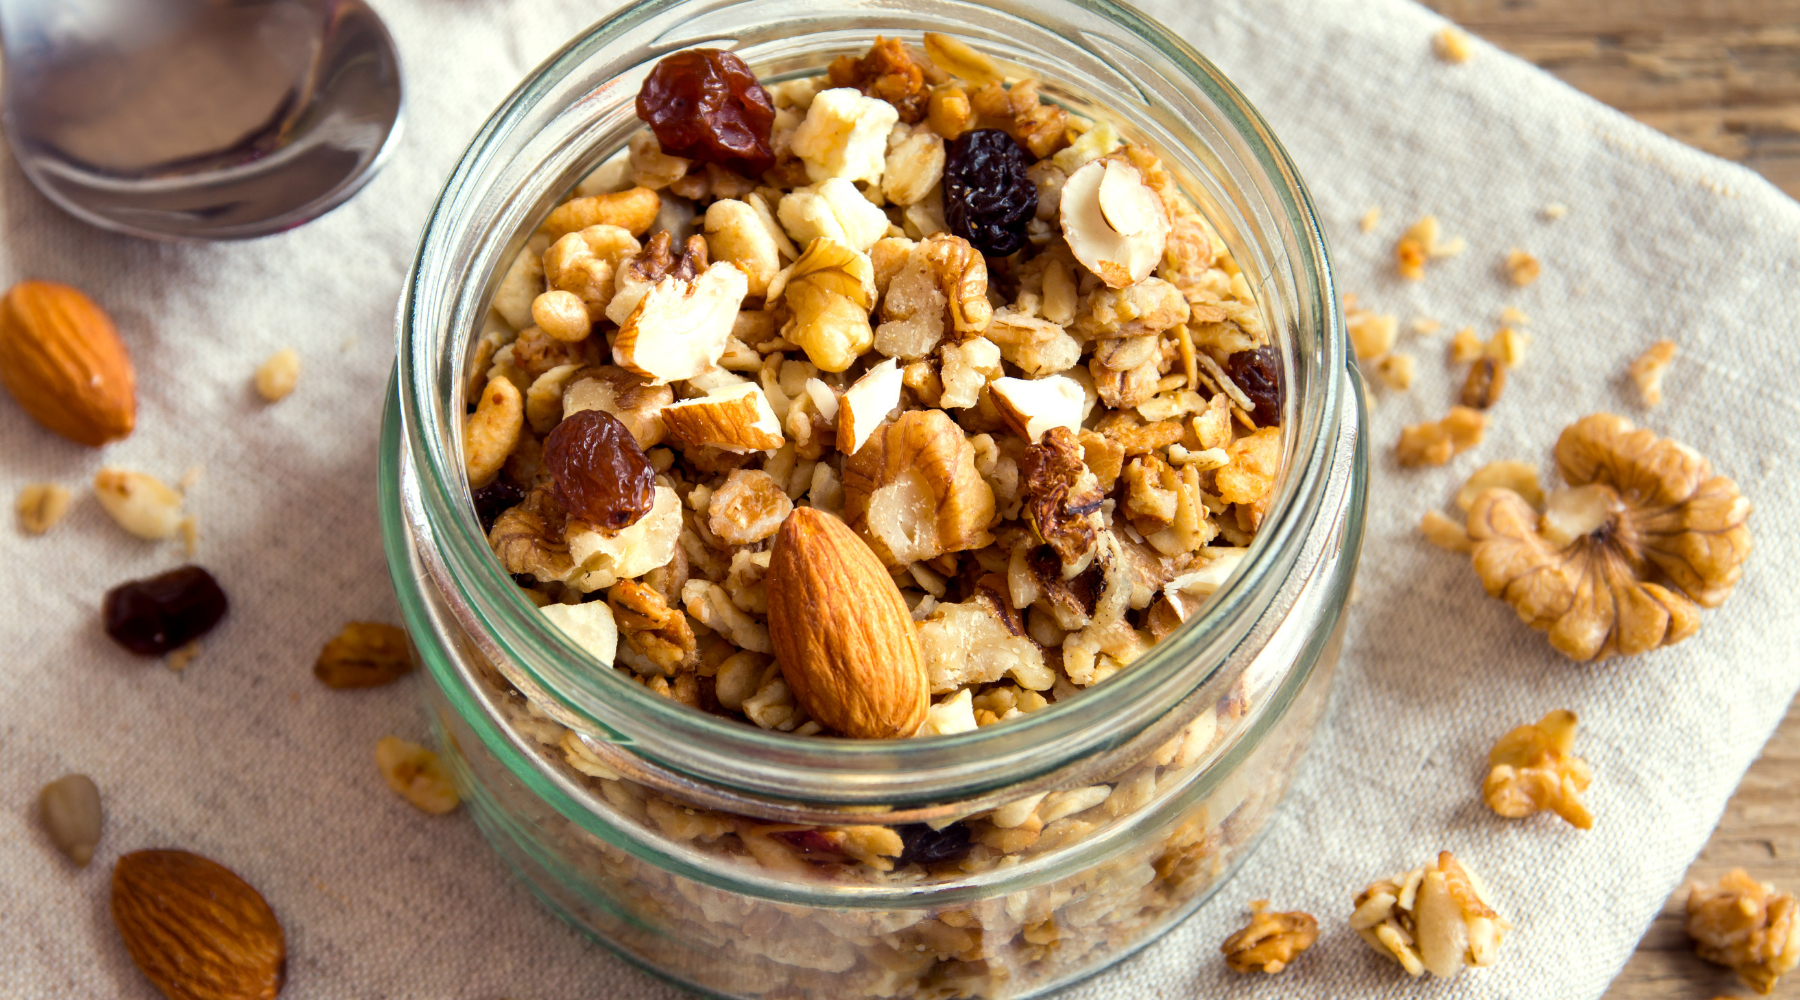 IS GRANOLA GOOD FOR YOU? THE ABSOLUTE TRUTH!